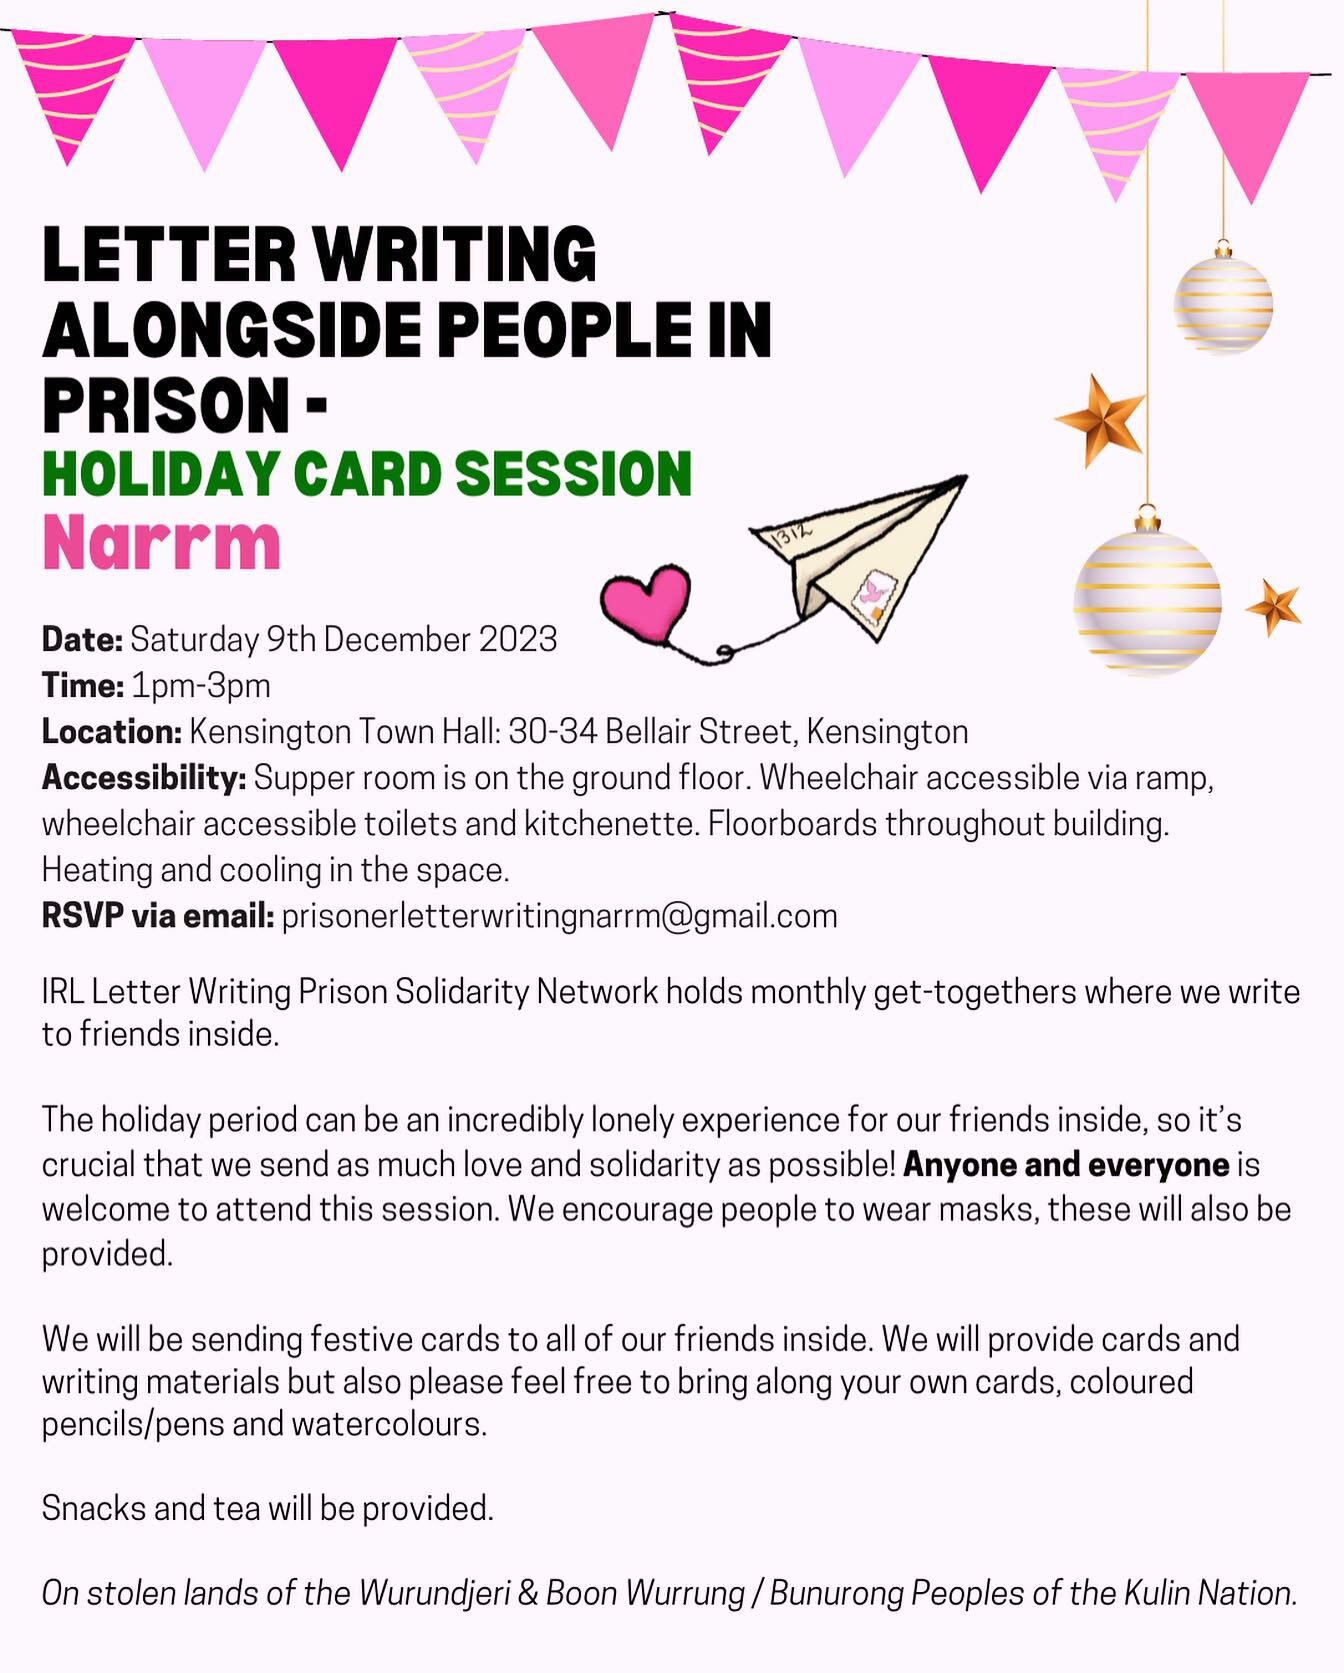 Letter Writing Alongside People In Prison Holiday Card Session Narrm

Date: Saturday 9th December 2023
Time: 1pm-3pm
Location: Kensington Town Hall: 30-34 Bellair Street, Kensington
Accessibility: Supper room is on the ground floor. Wheelchair access